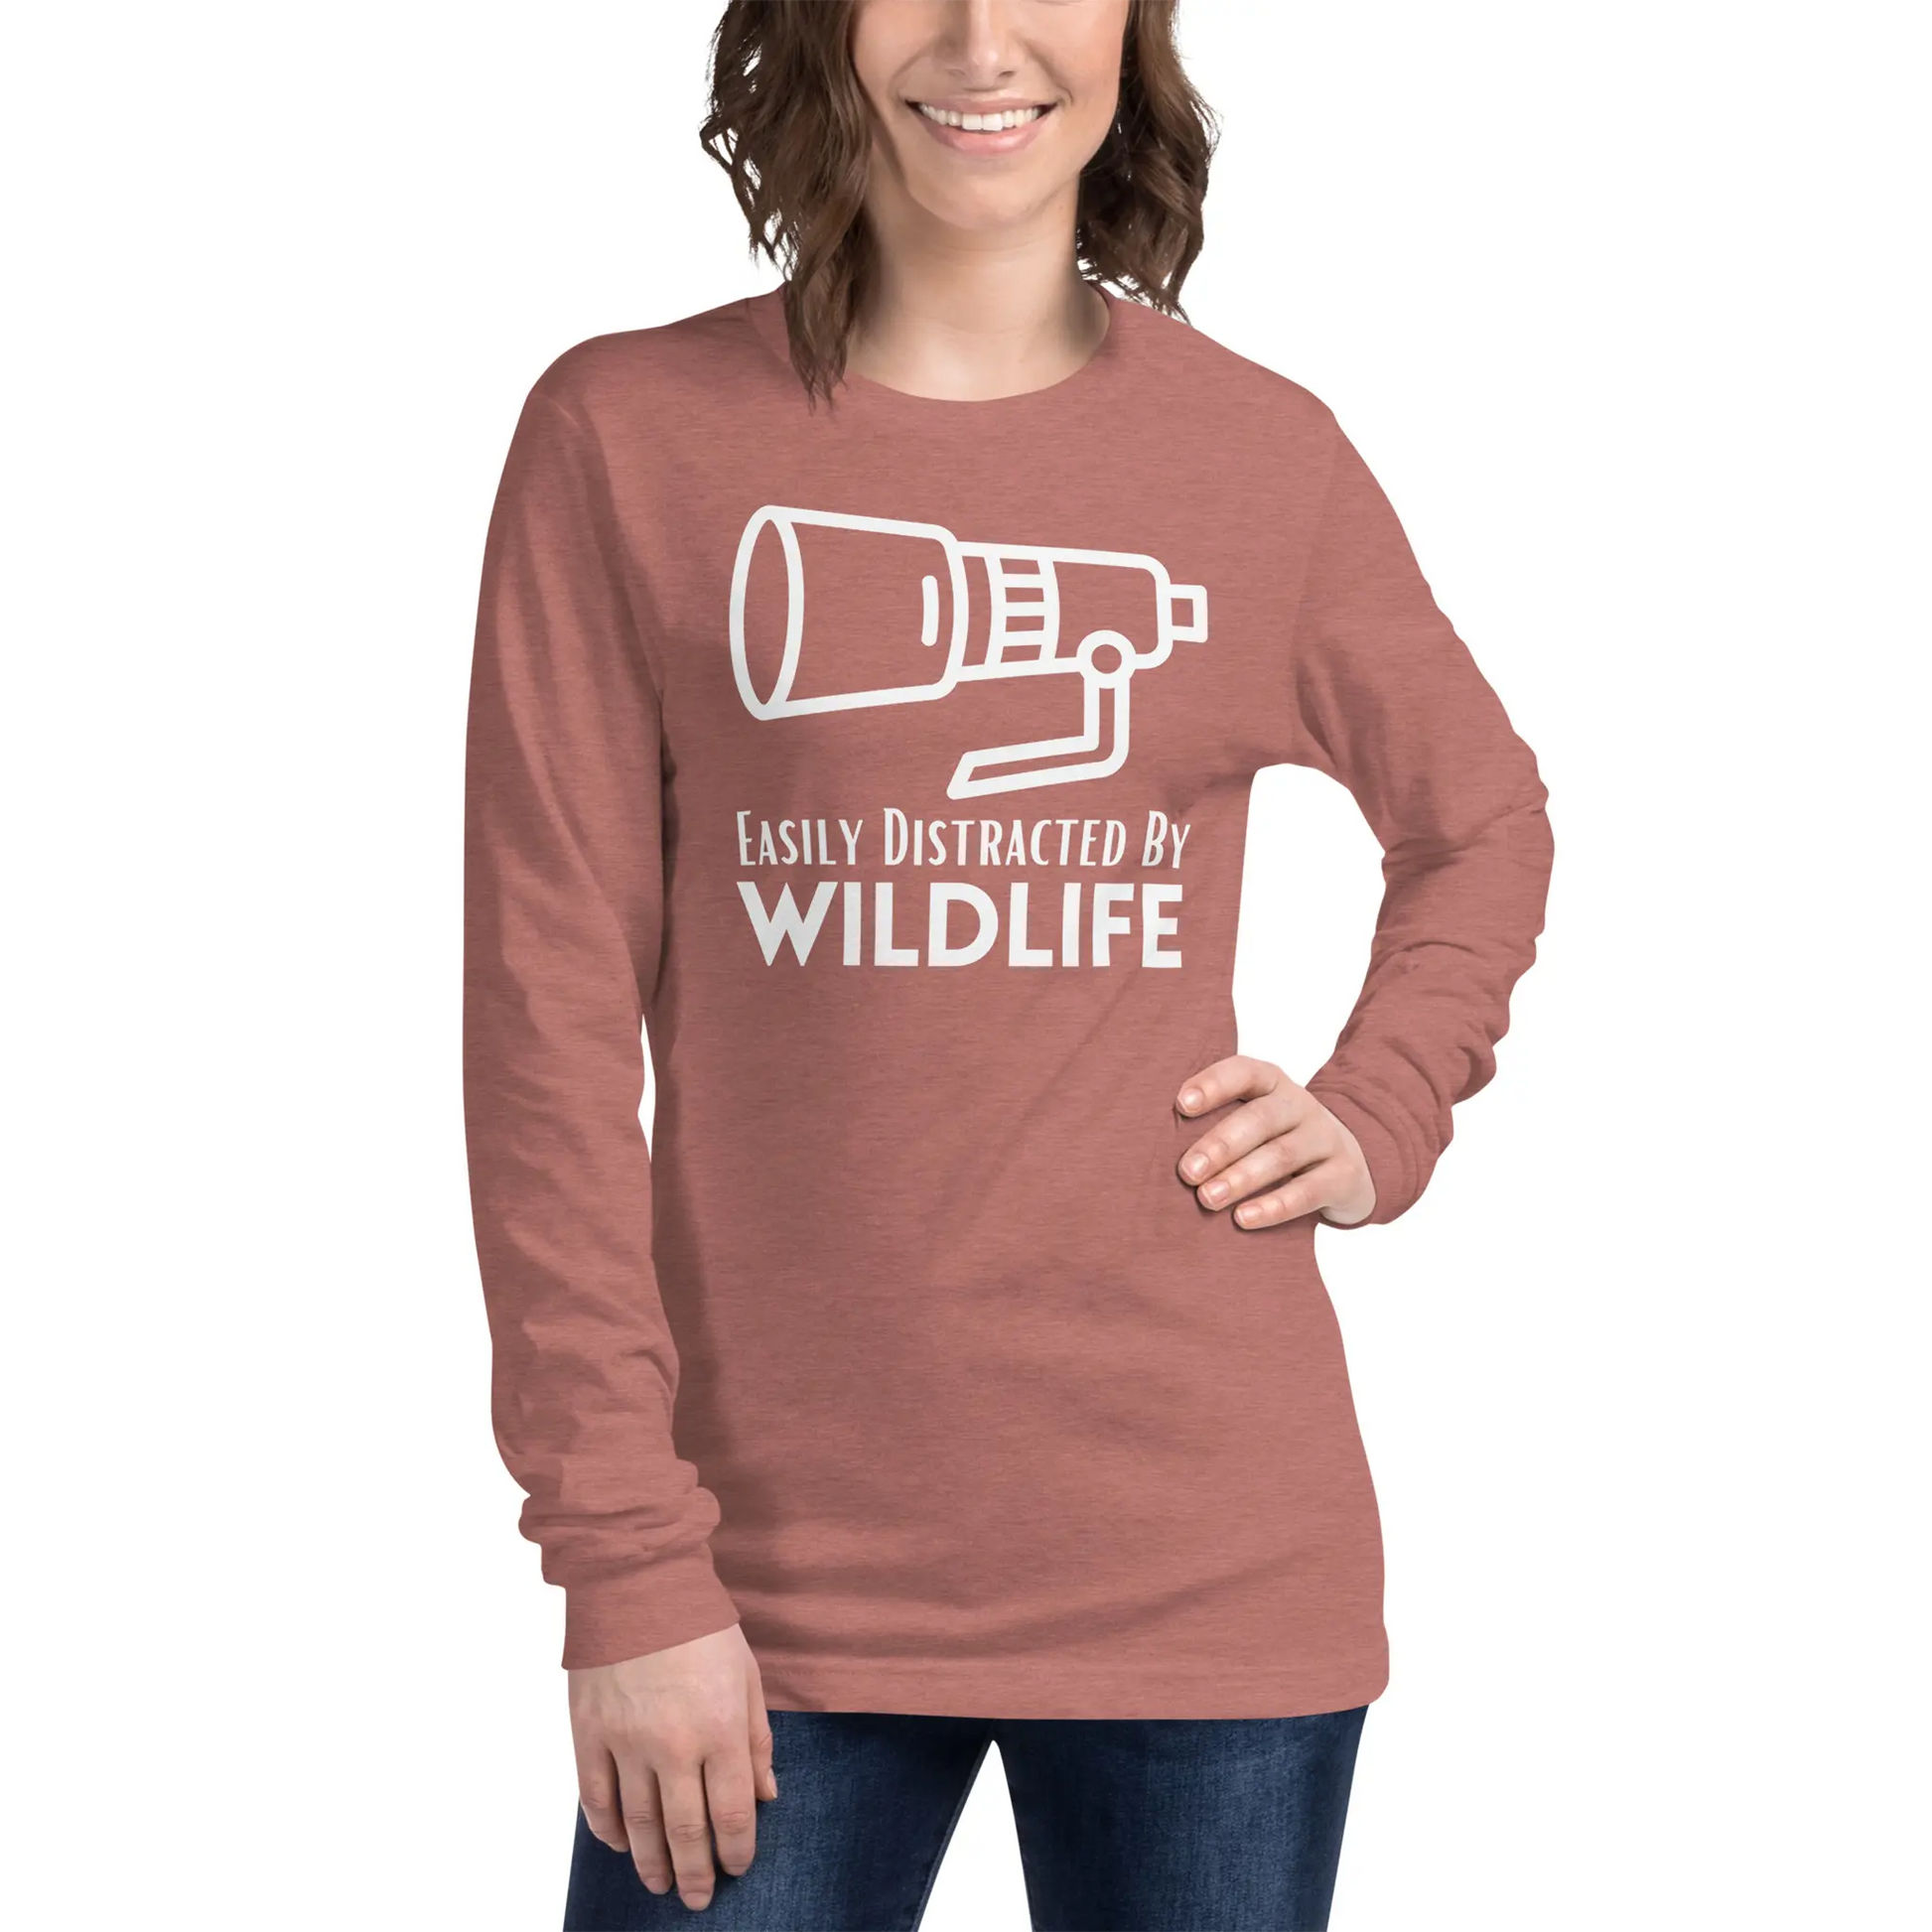 Wildlife photography long sleeve shirts for women.